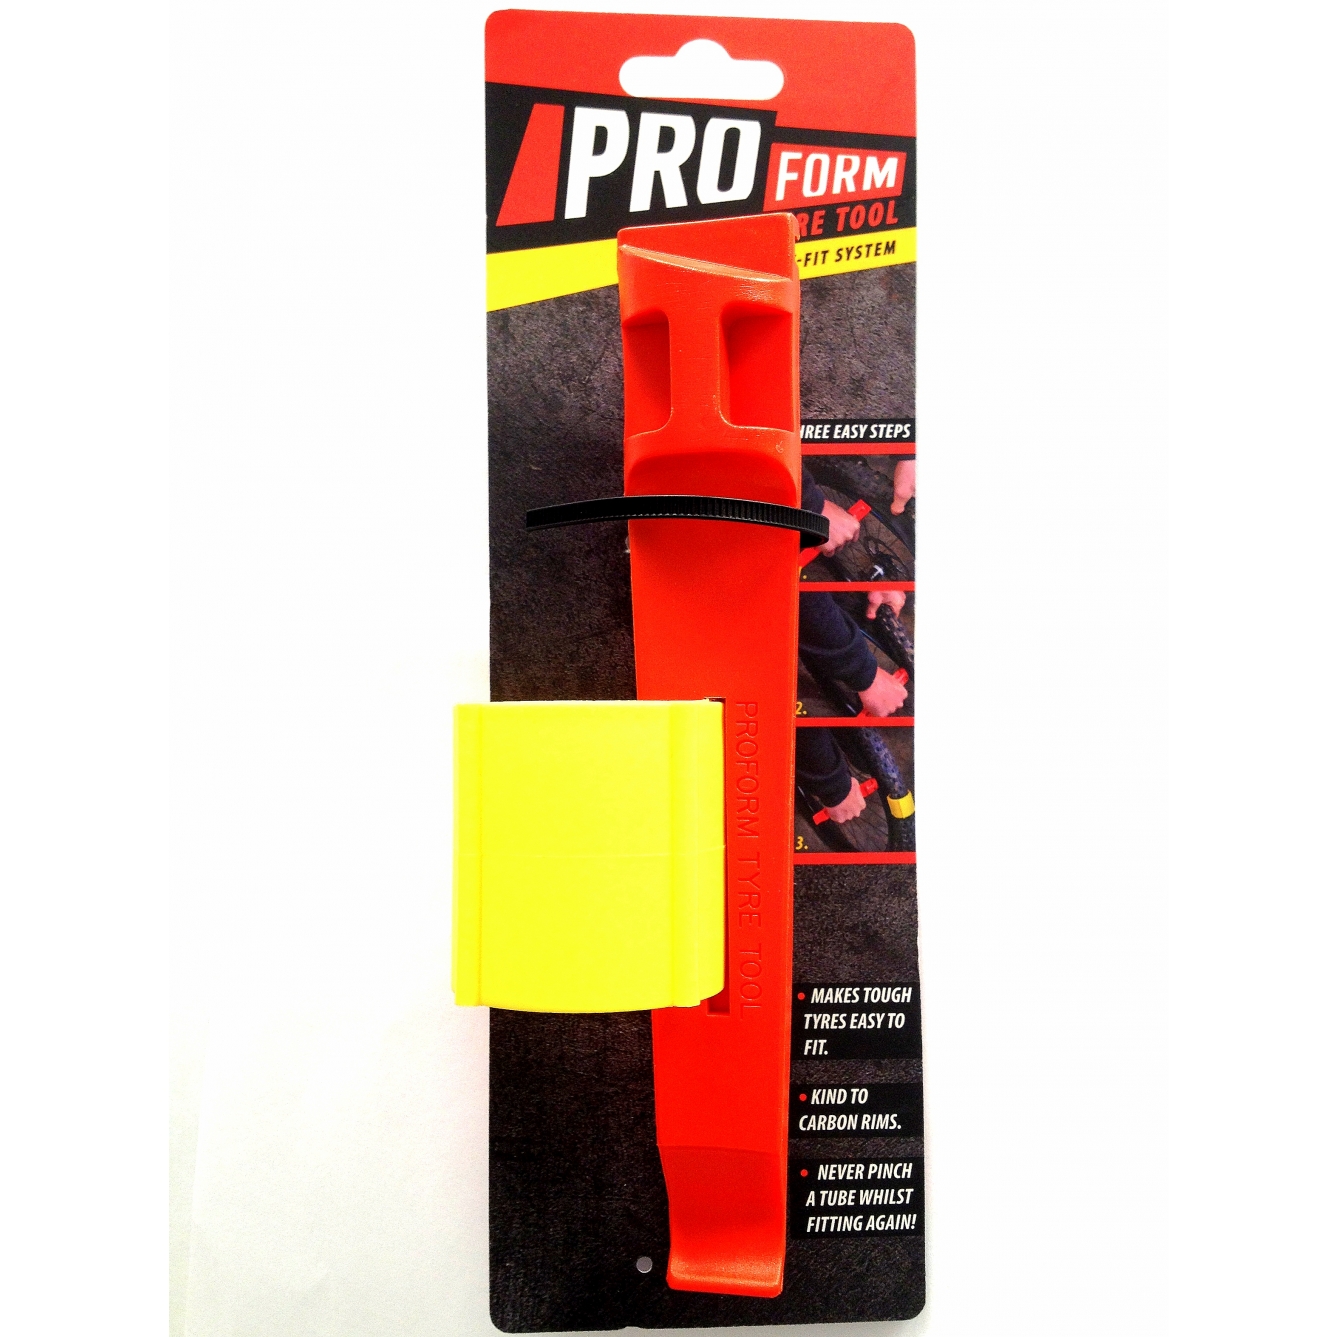 Proform tyre tool - deal with tough tyres